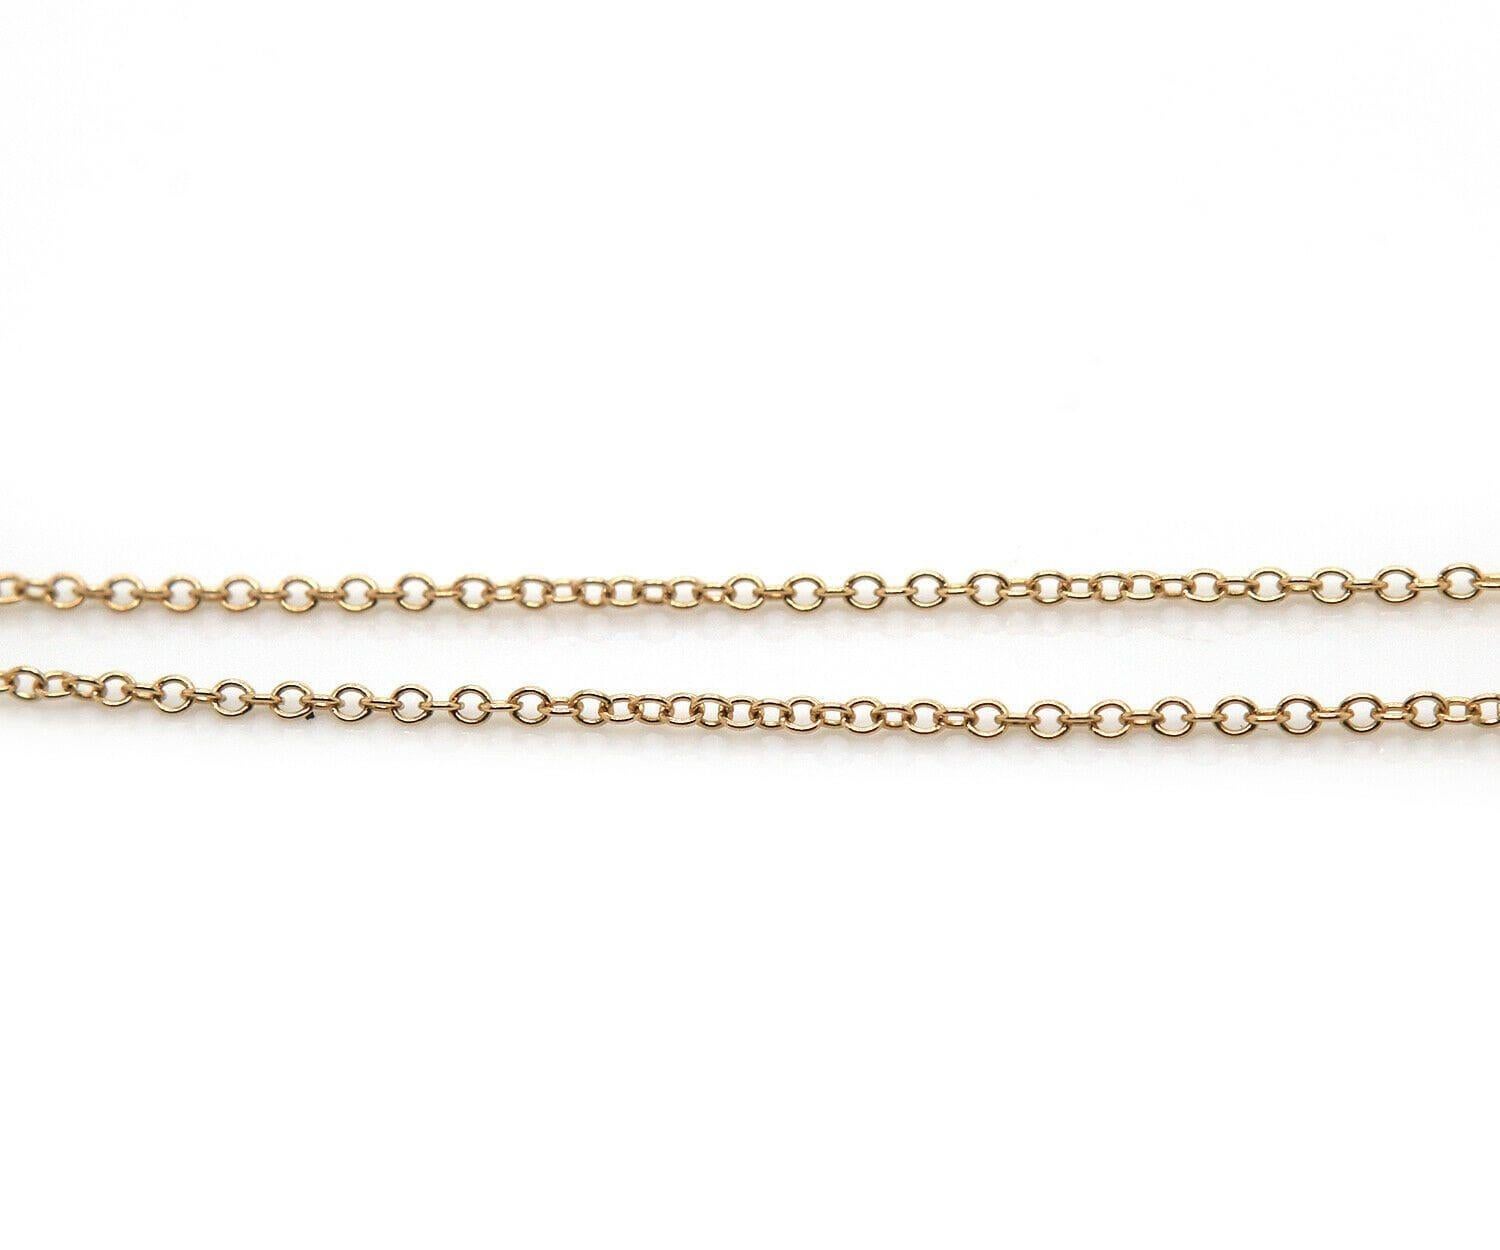 New Gabriel & Co. Curved Bar Multi Strand Fringe Necklace in 14K Yellow Gold In New Condition For Sale In Vienna, VA